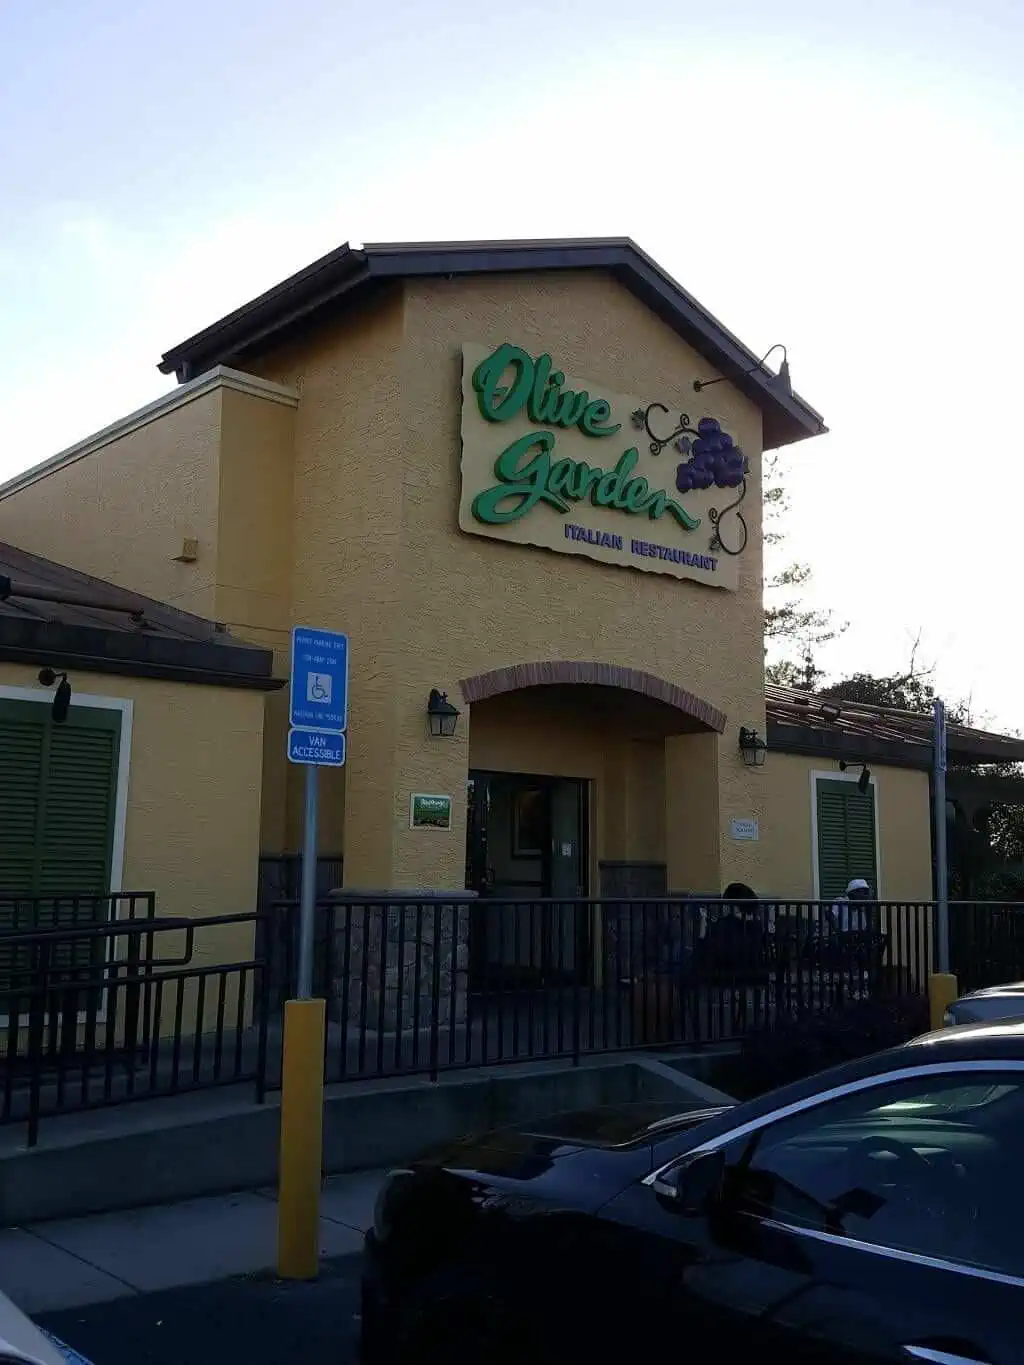 Two New Olive Gardens For The Csra Augusta Business Daily